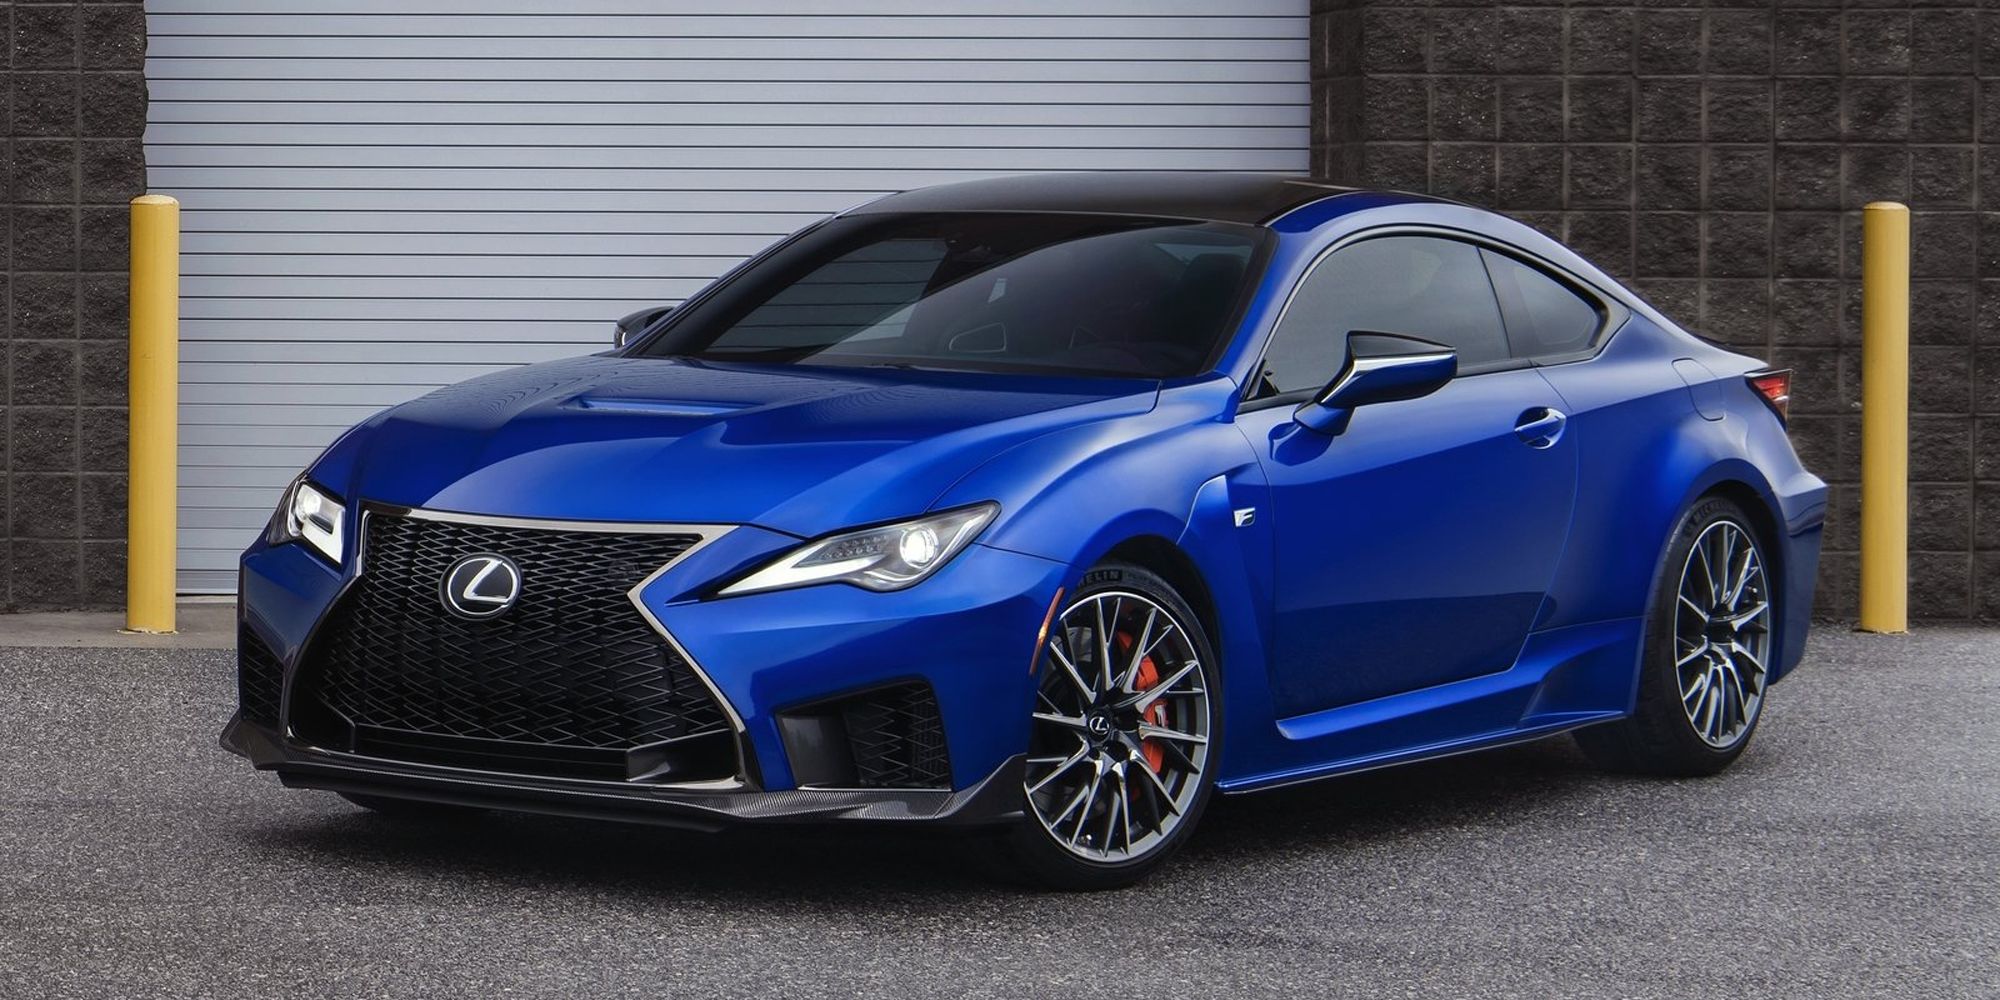 Front 3/4 view of a blue RC F 